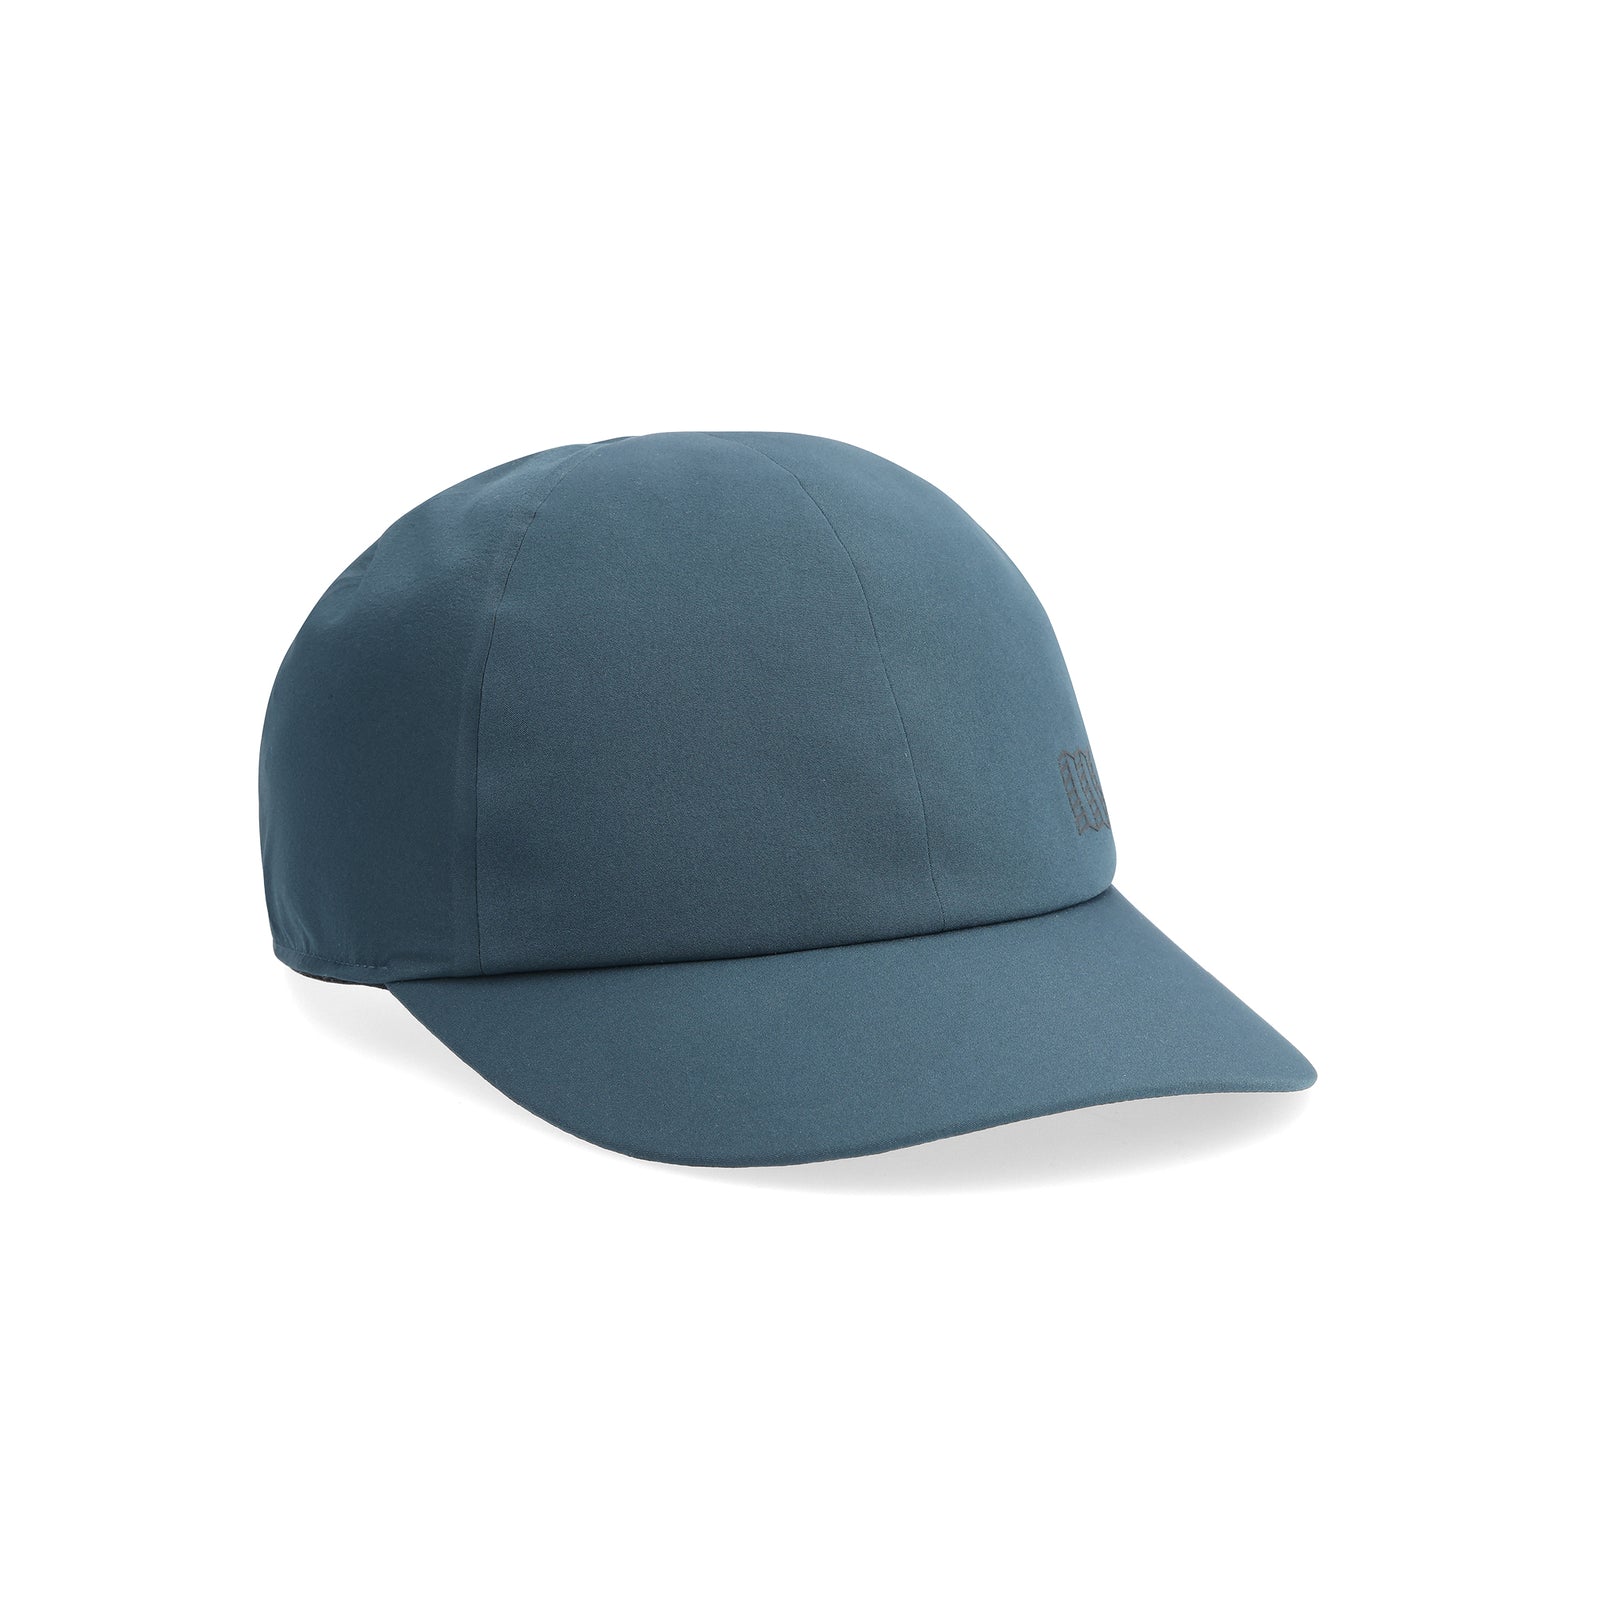 Front View of Topo Designs Global Tech Cap in "Pond Blue"